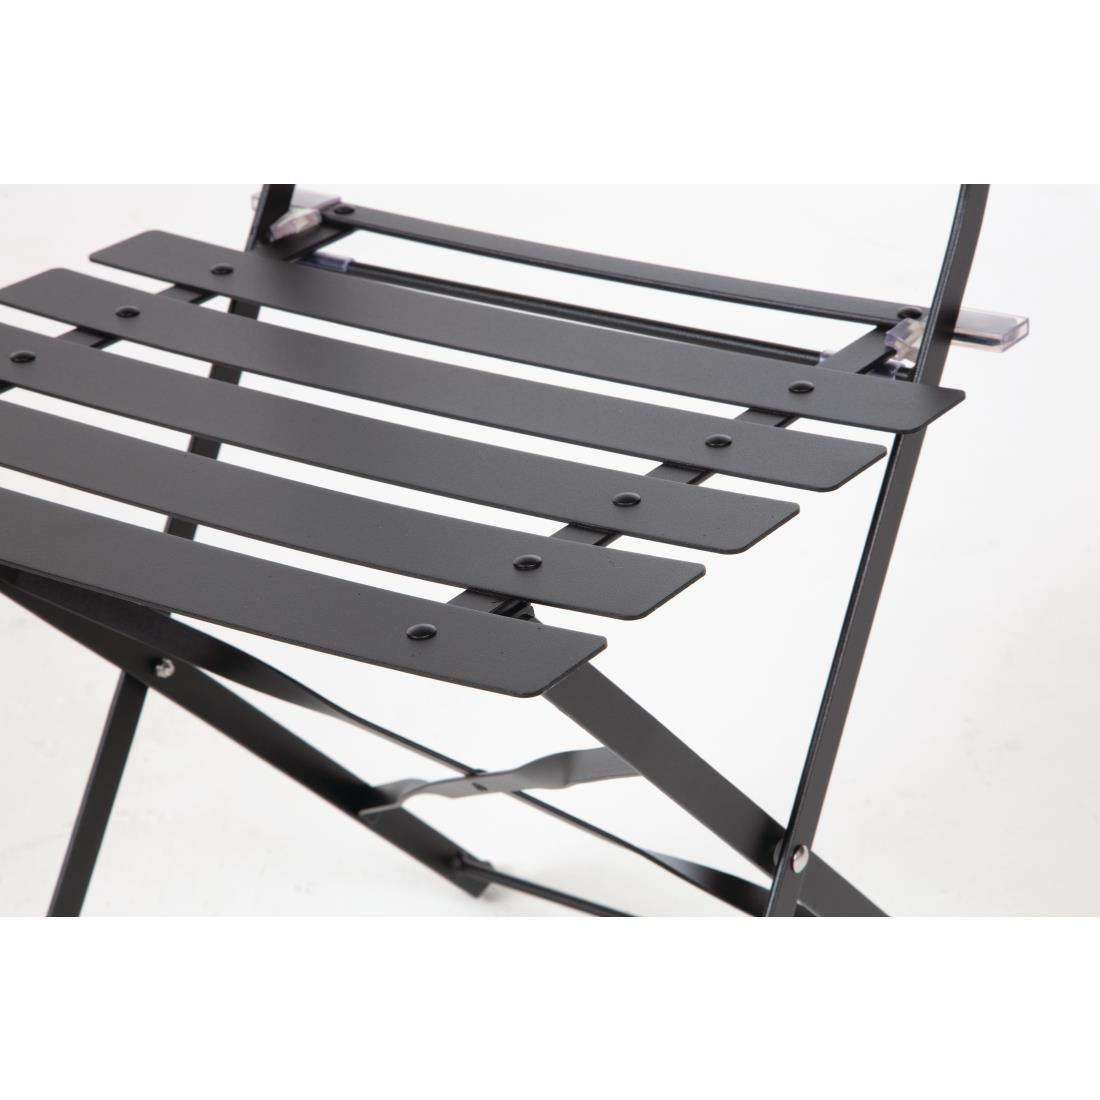 Bolero Black Pavement Style Steel Chairs (Pack of 2) - GH553  - 4